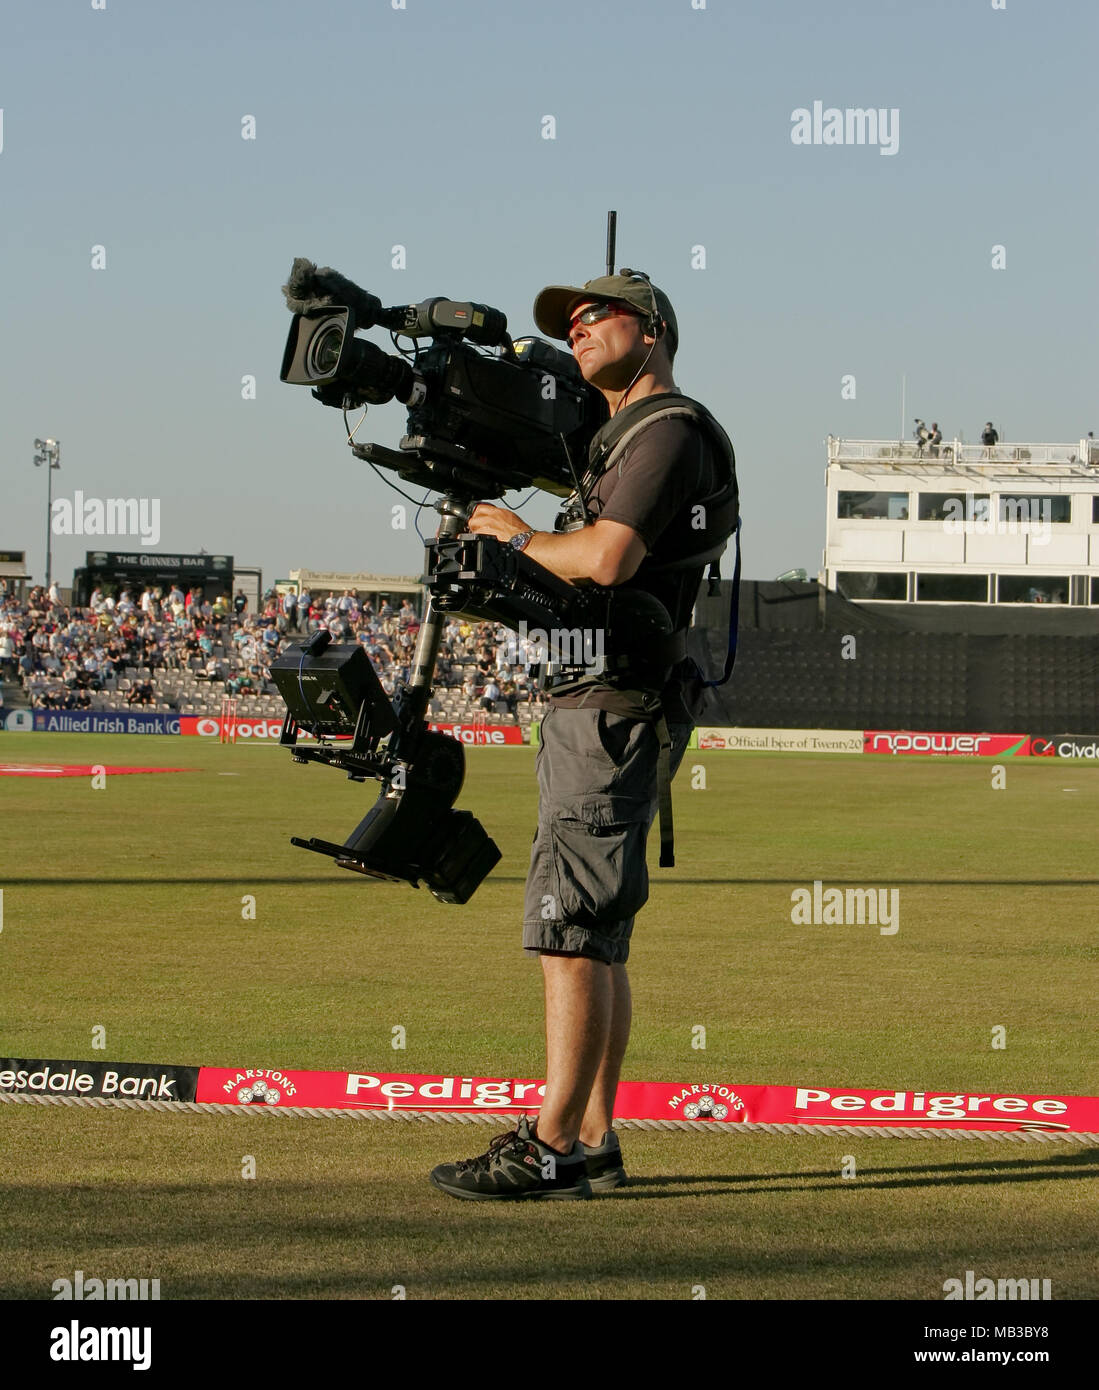 A Sky TV camera operator working and filming live TV at the day of the 2008 Twenty20 cricket finals matches Stock Photo